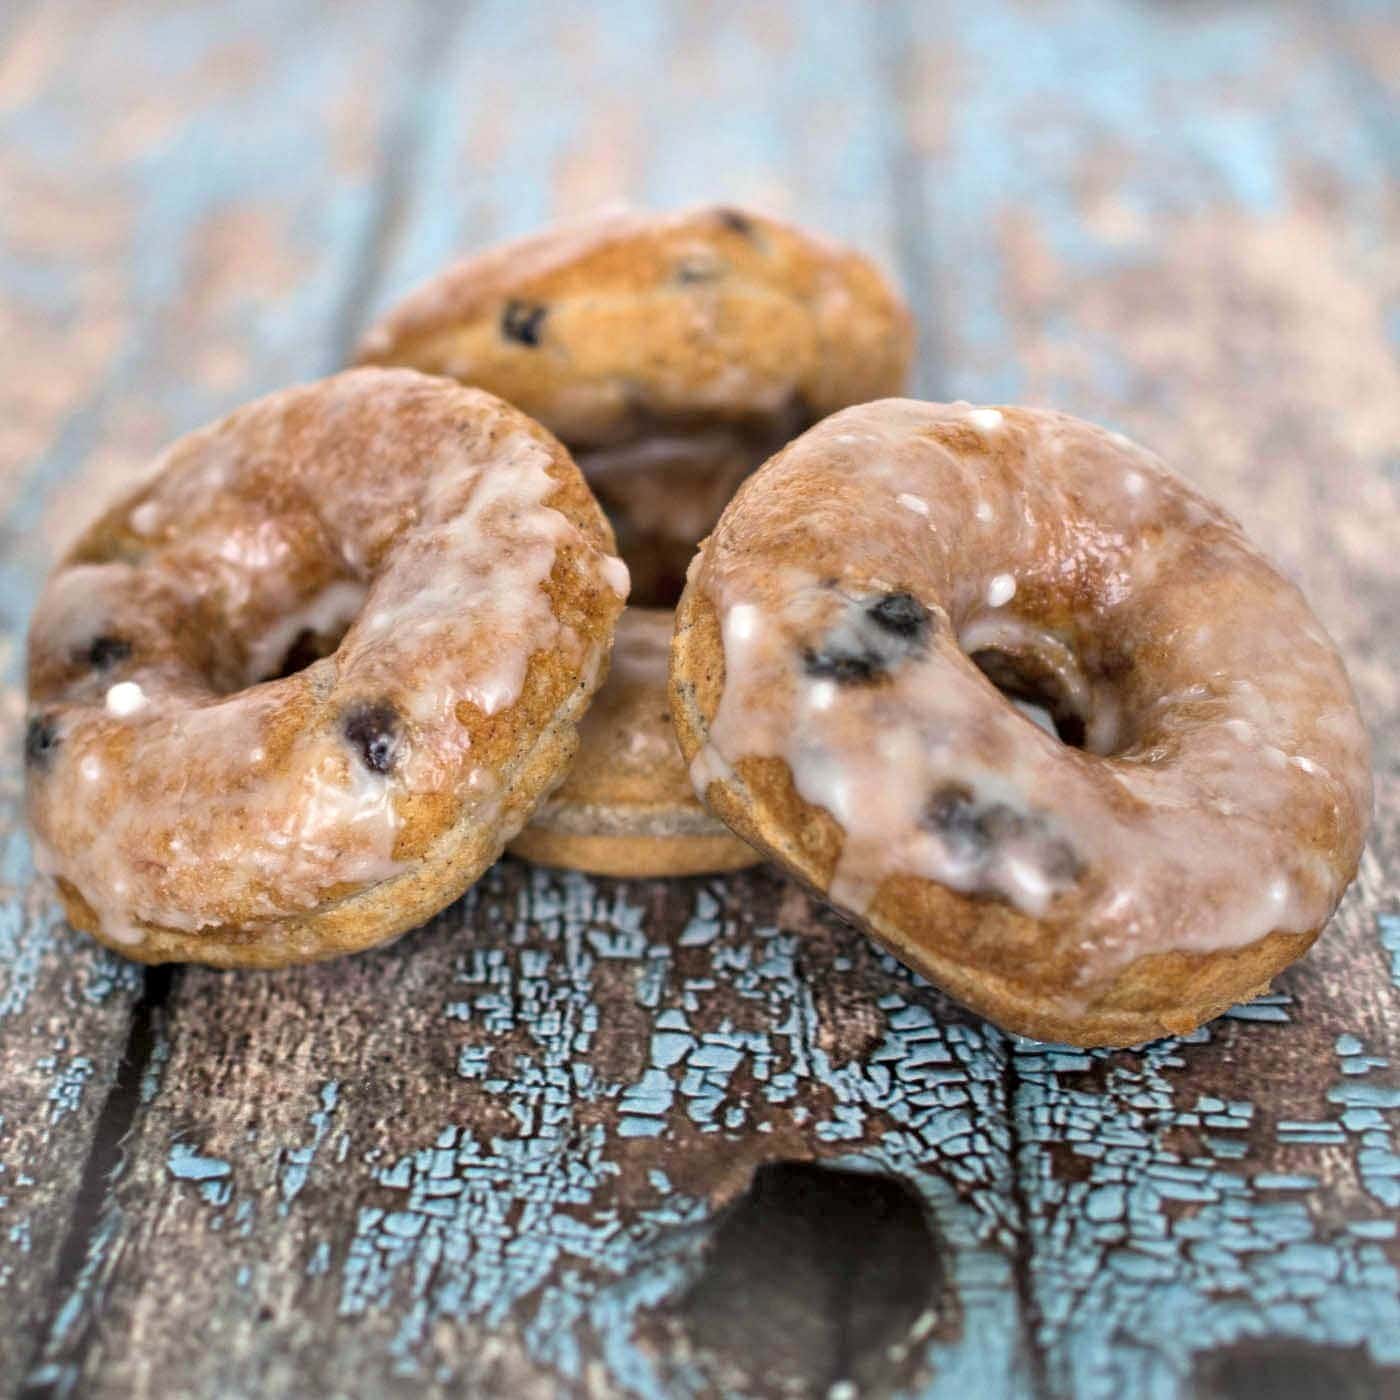 Chai Raisin Donuts with Chai Glaze - sweetly spiced donuts perfect for enjoying with Chai tea.